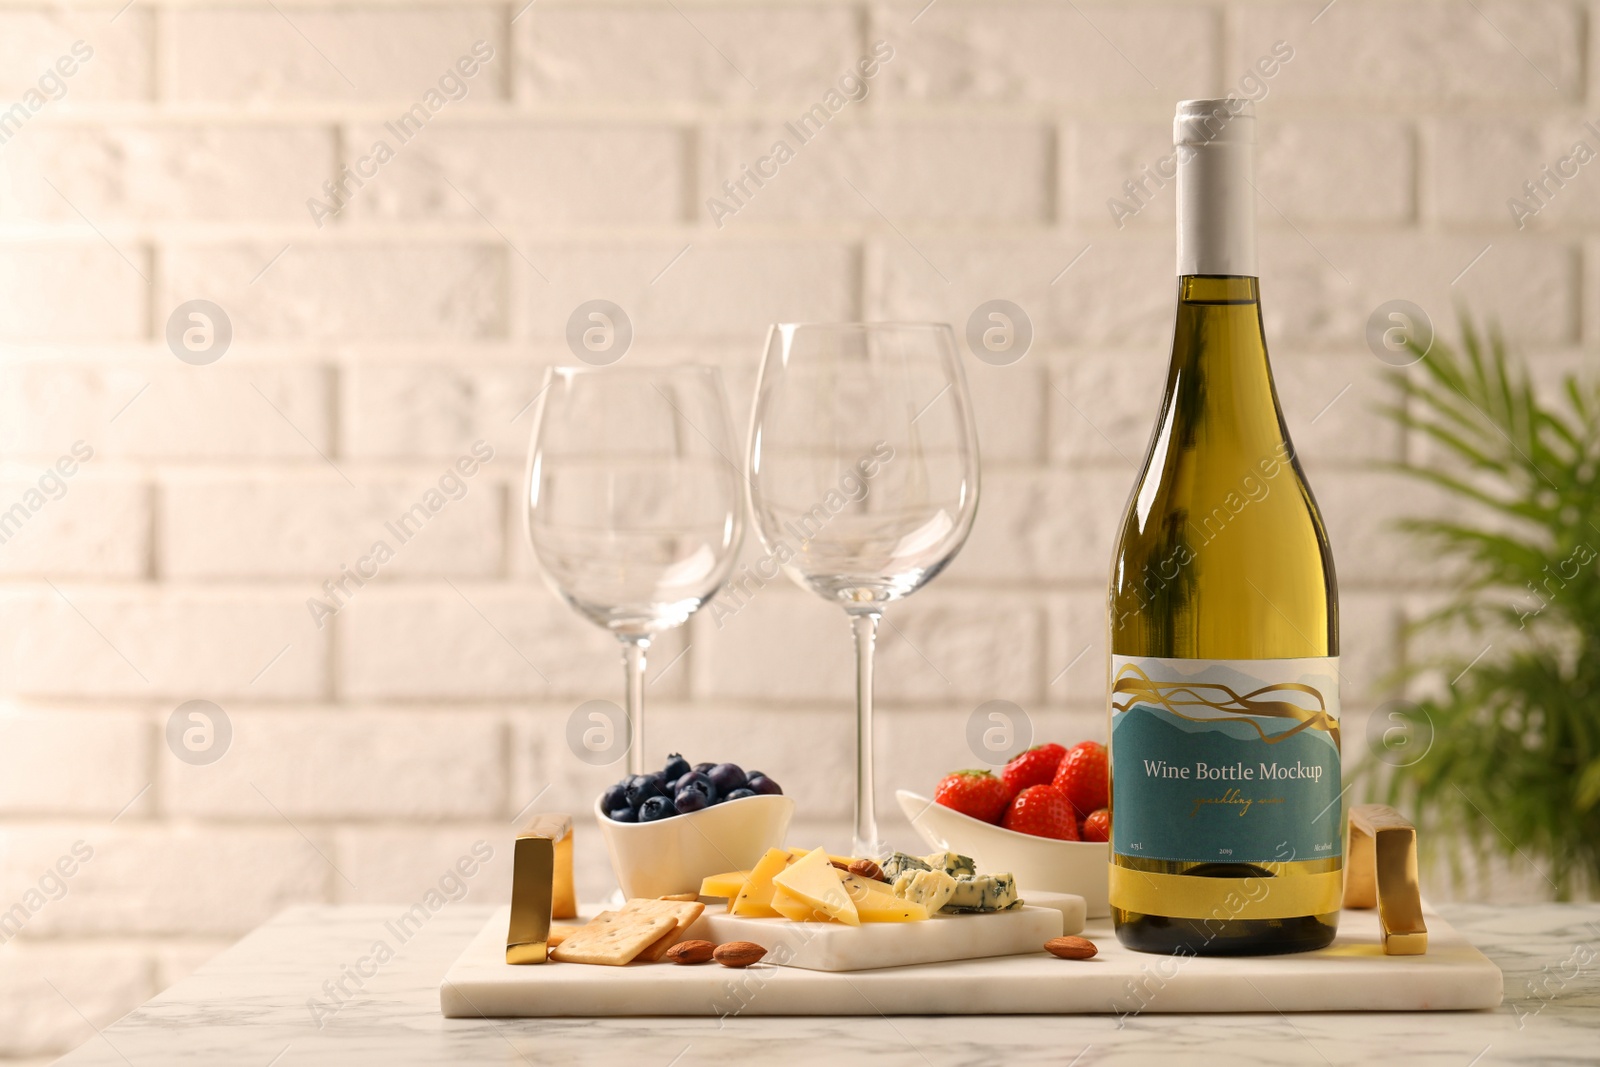 Photo of Bottle of wine, glasses and delicious snacks on white marble table